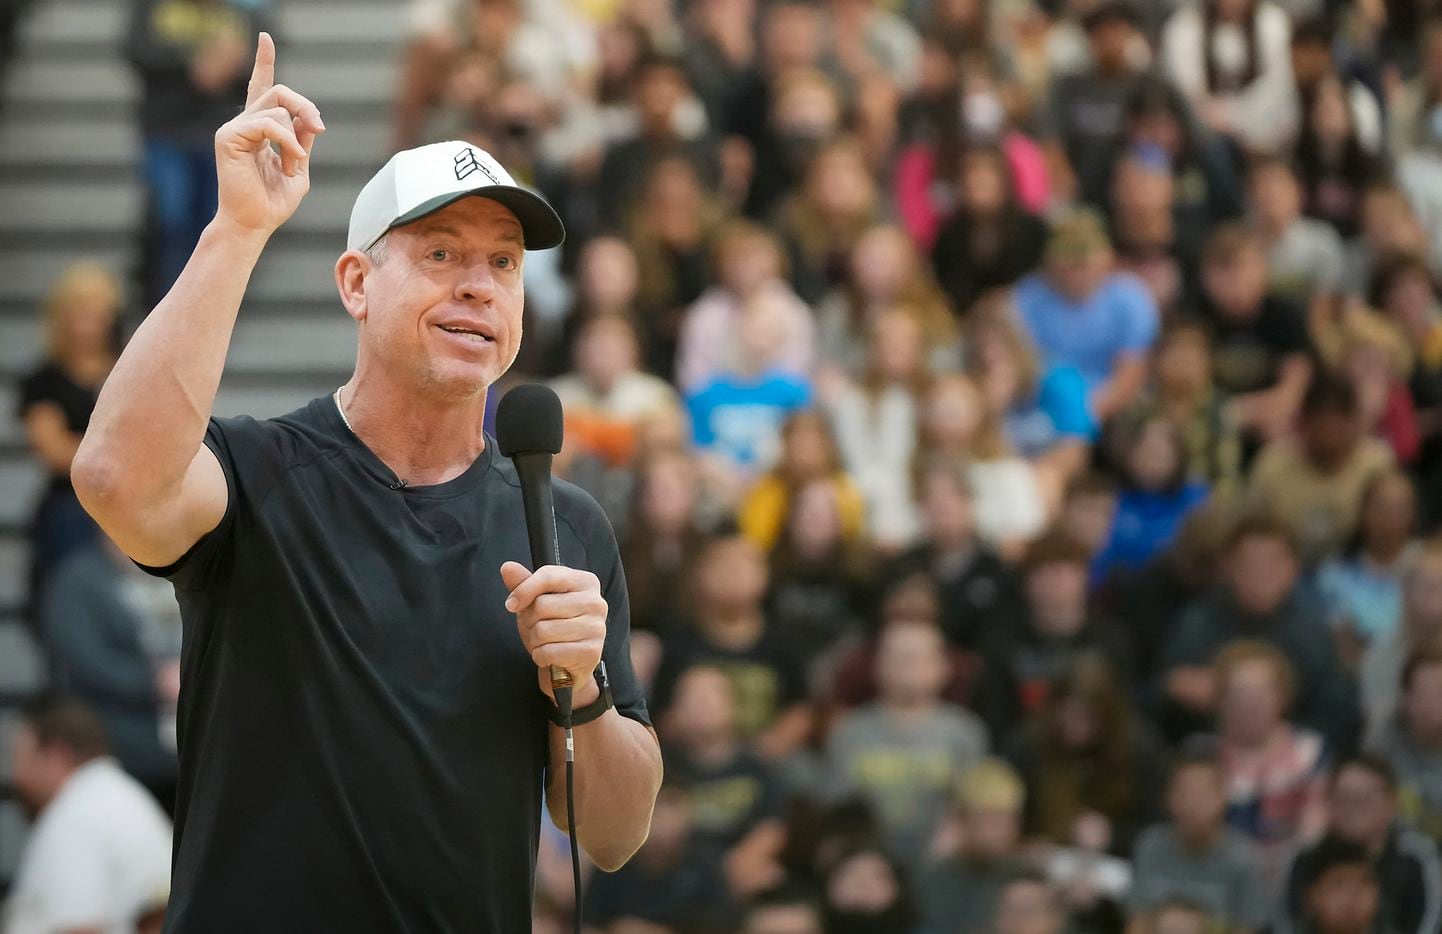 Aikman talks to the students during a pep rally at Henryetta High School.